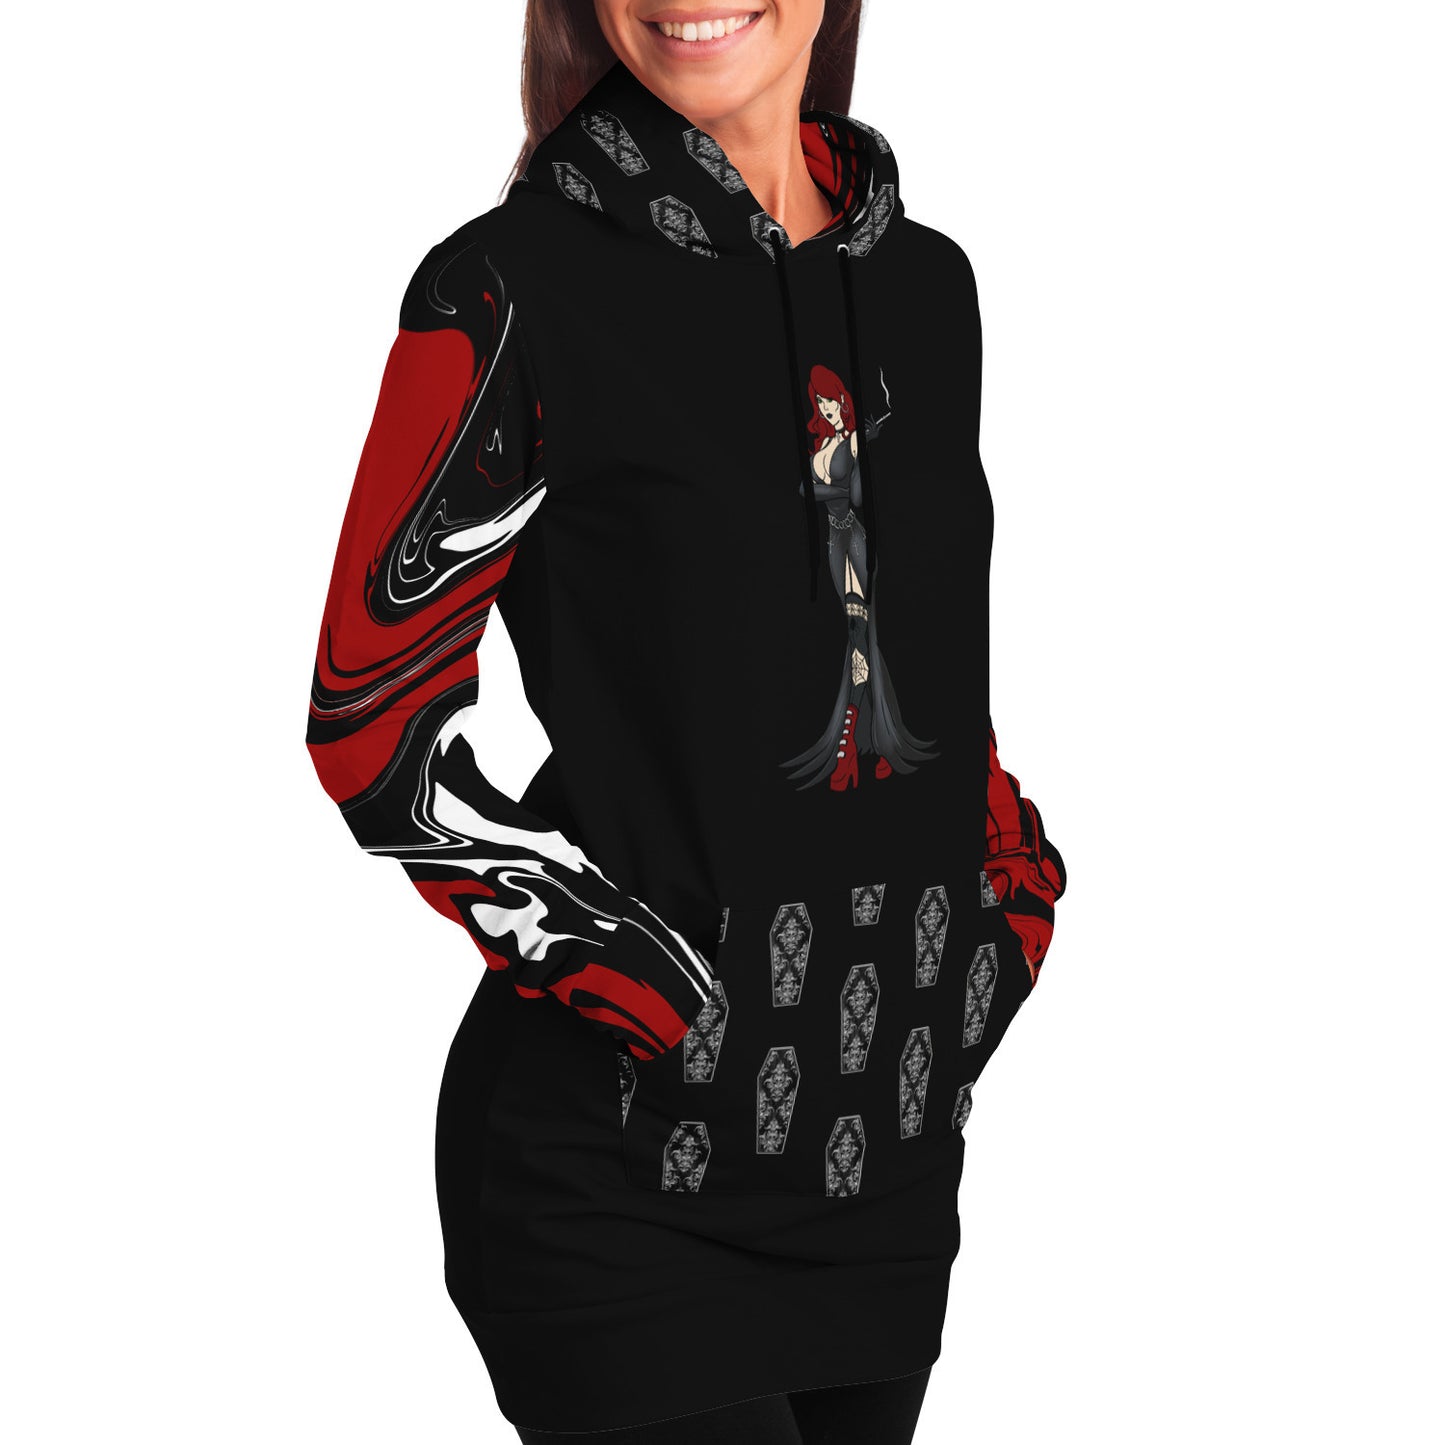 Women's Gothic Red and Black Coffin and Graphic Fashion Dress Hoodie